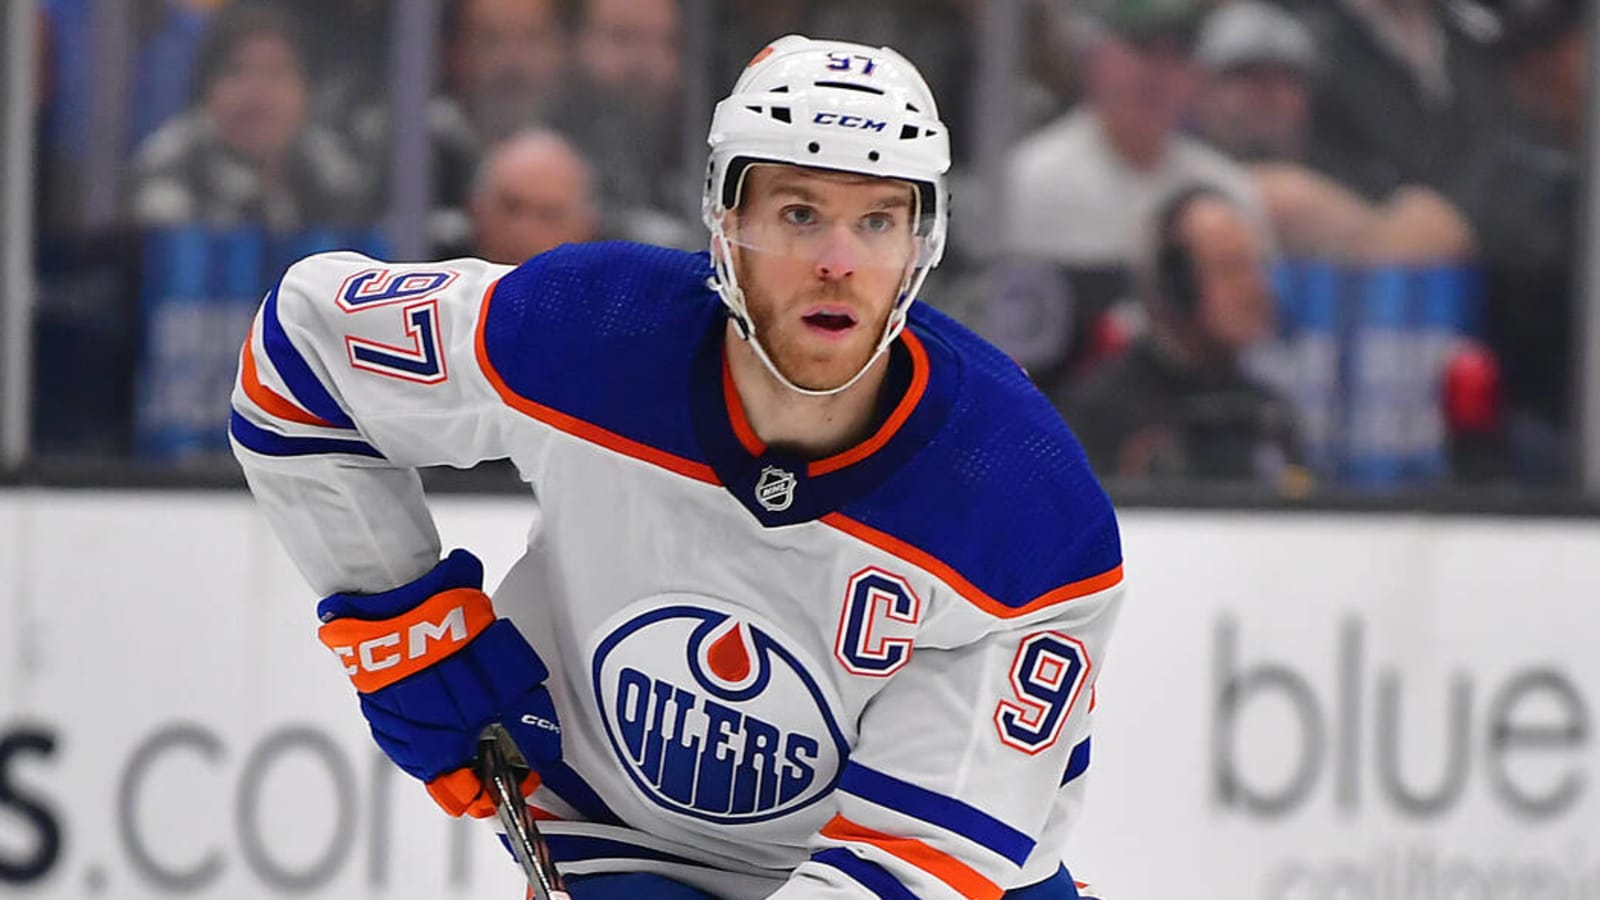 Oilers power play looks unstoppable while scoring at historic rate